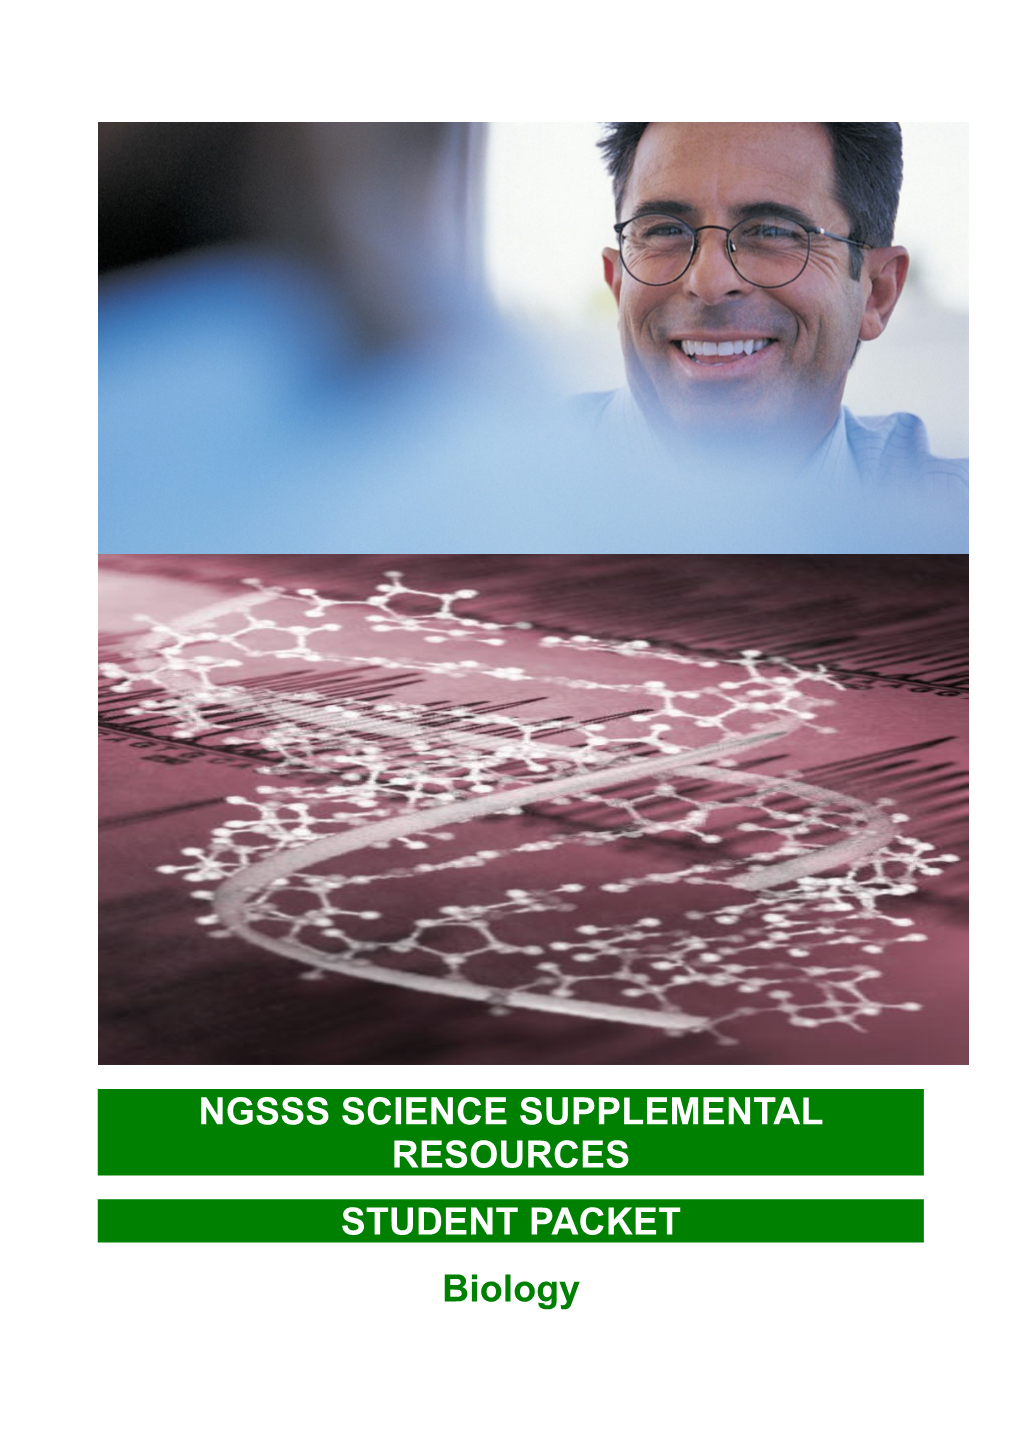 NGSSS Science Supplemental Resources